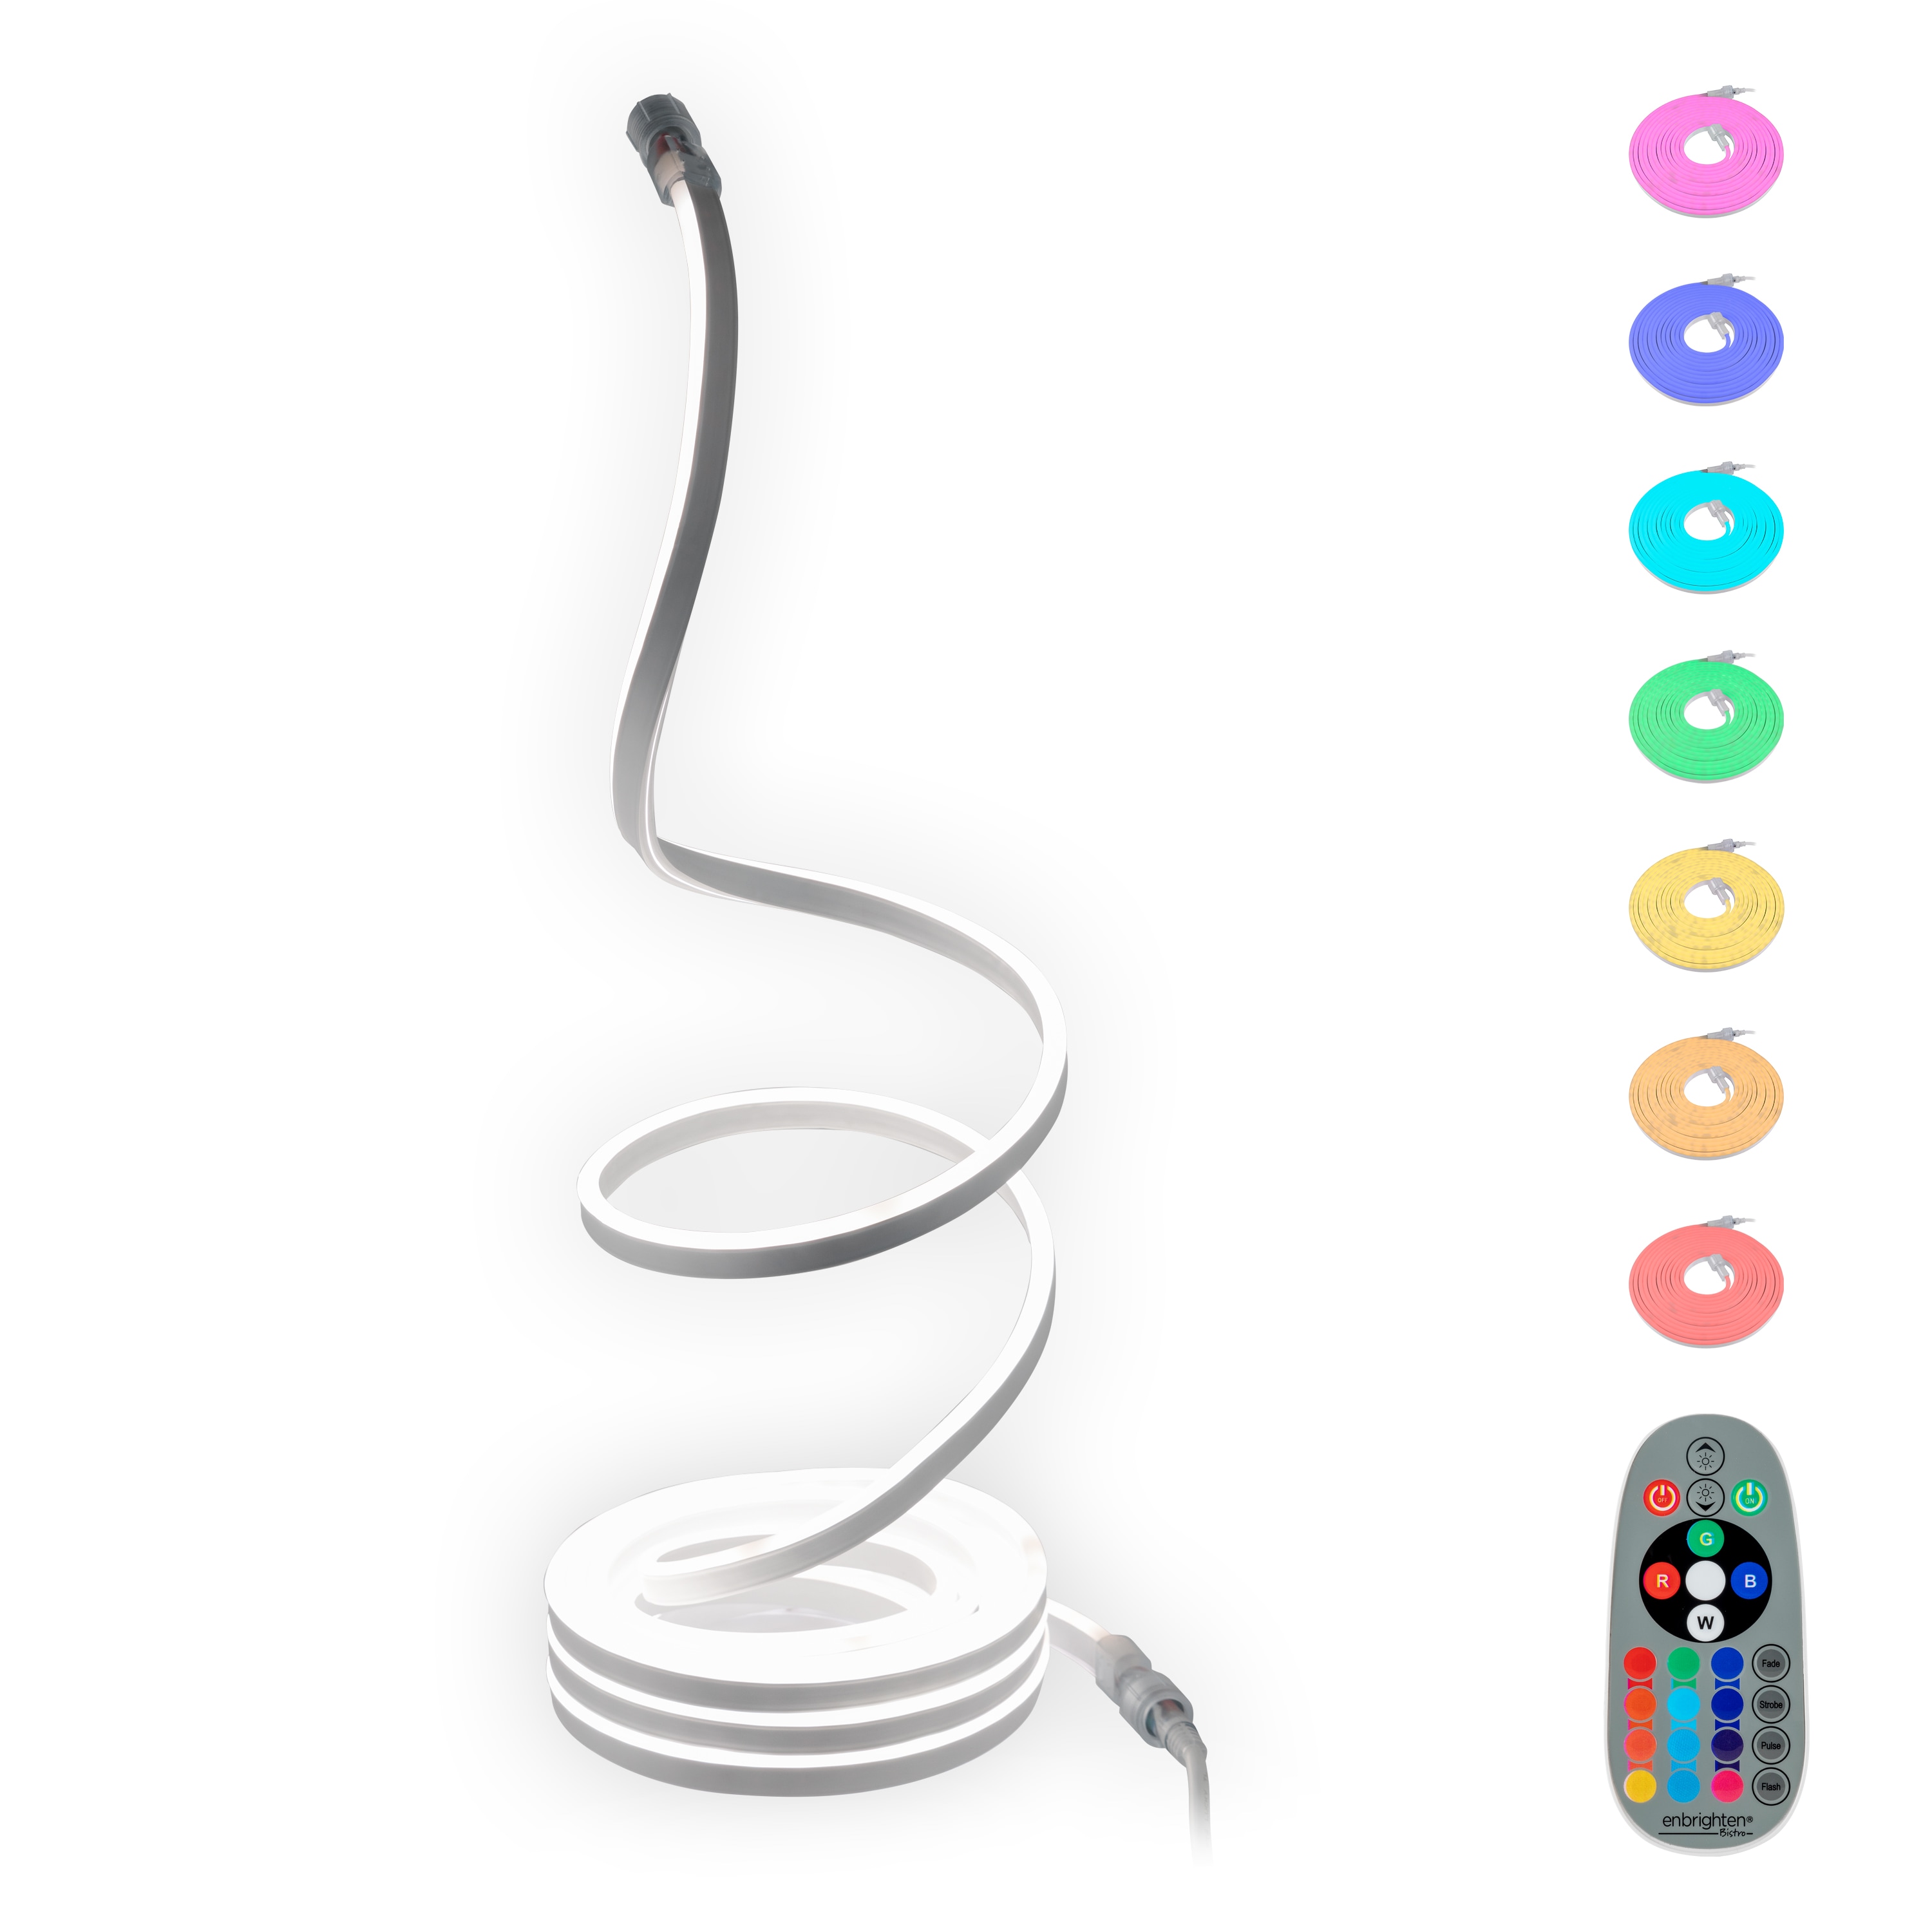 Litex 8-ft LED Rope Light Multi Colors Any Indoor Or Outdoor Place String 